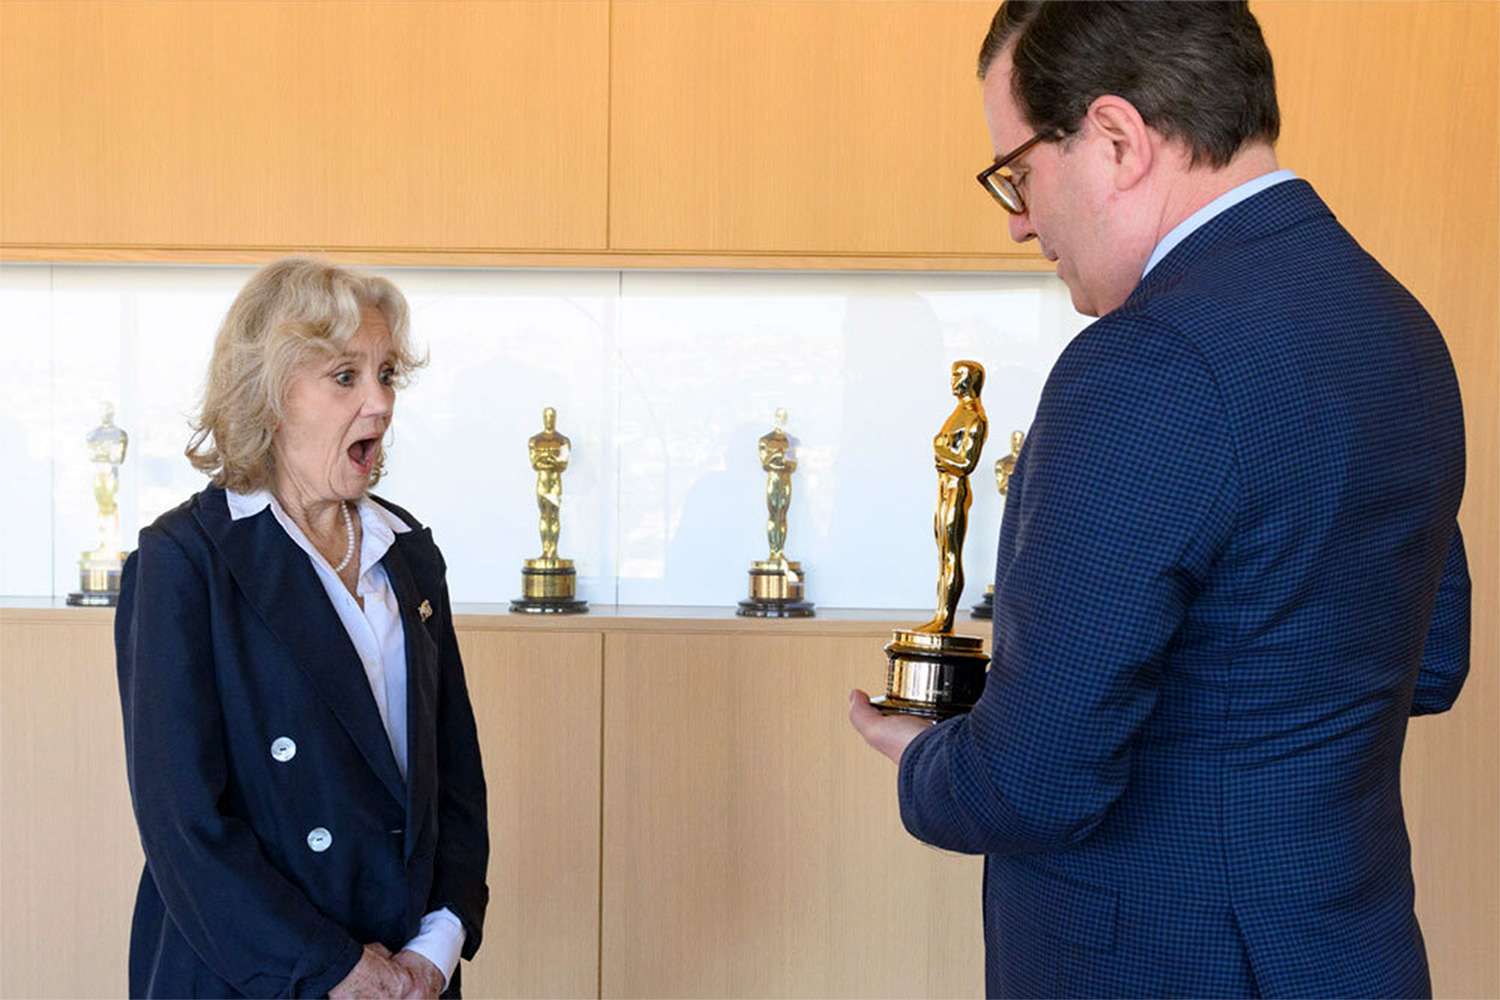 Hayley Mills Given New Oscar After Hers Went Missing Over 30 Years Ago | PEOPLE.com